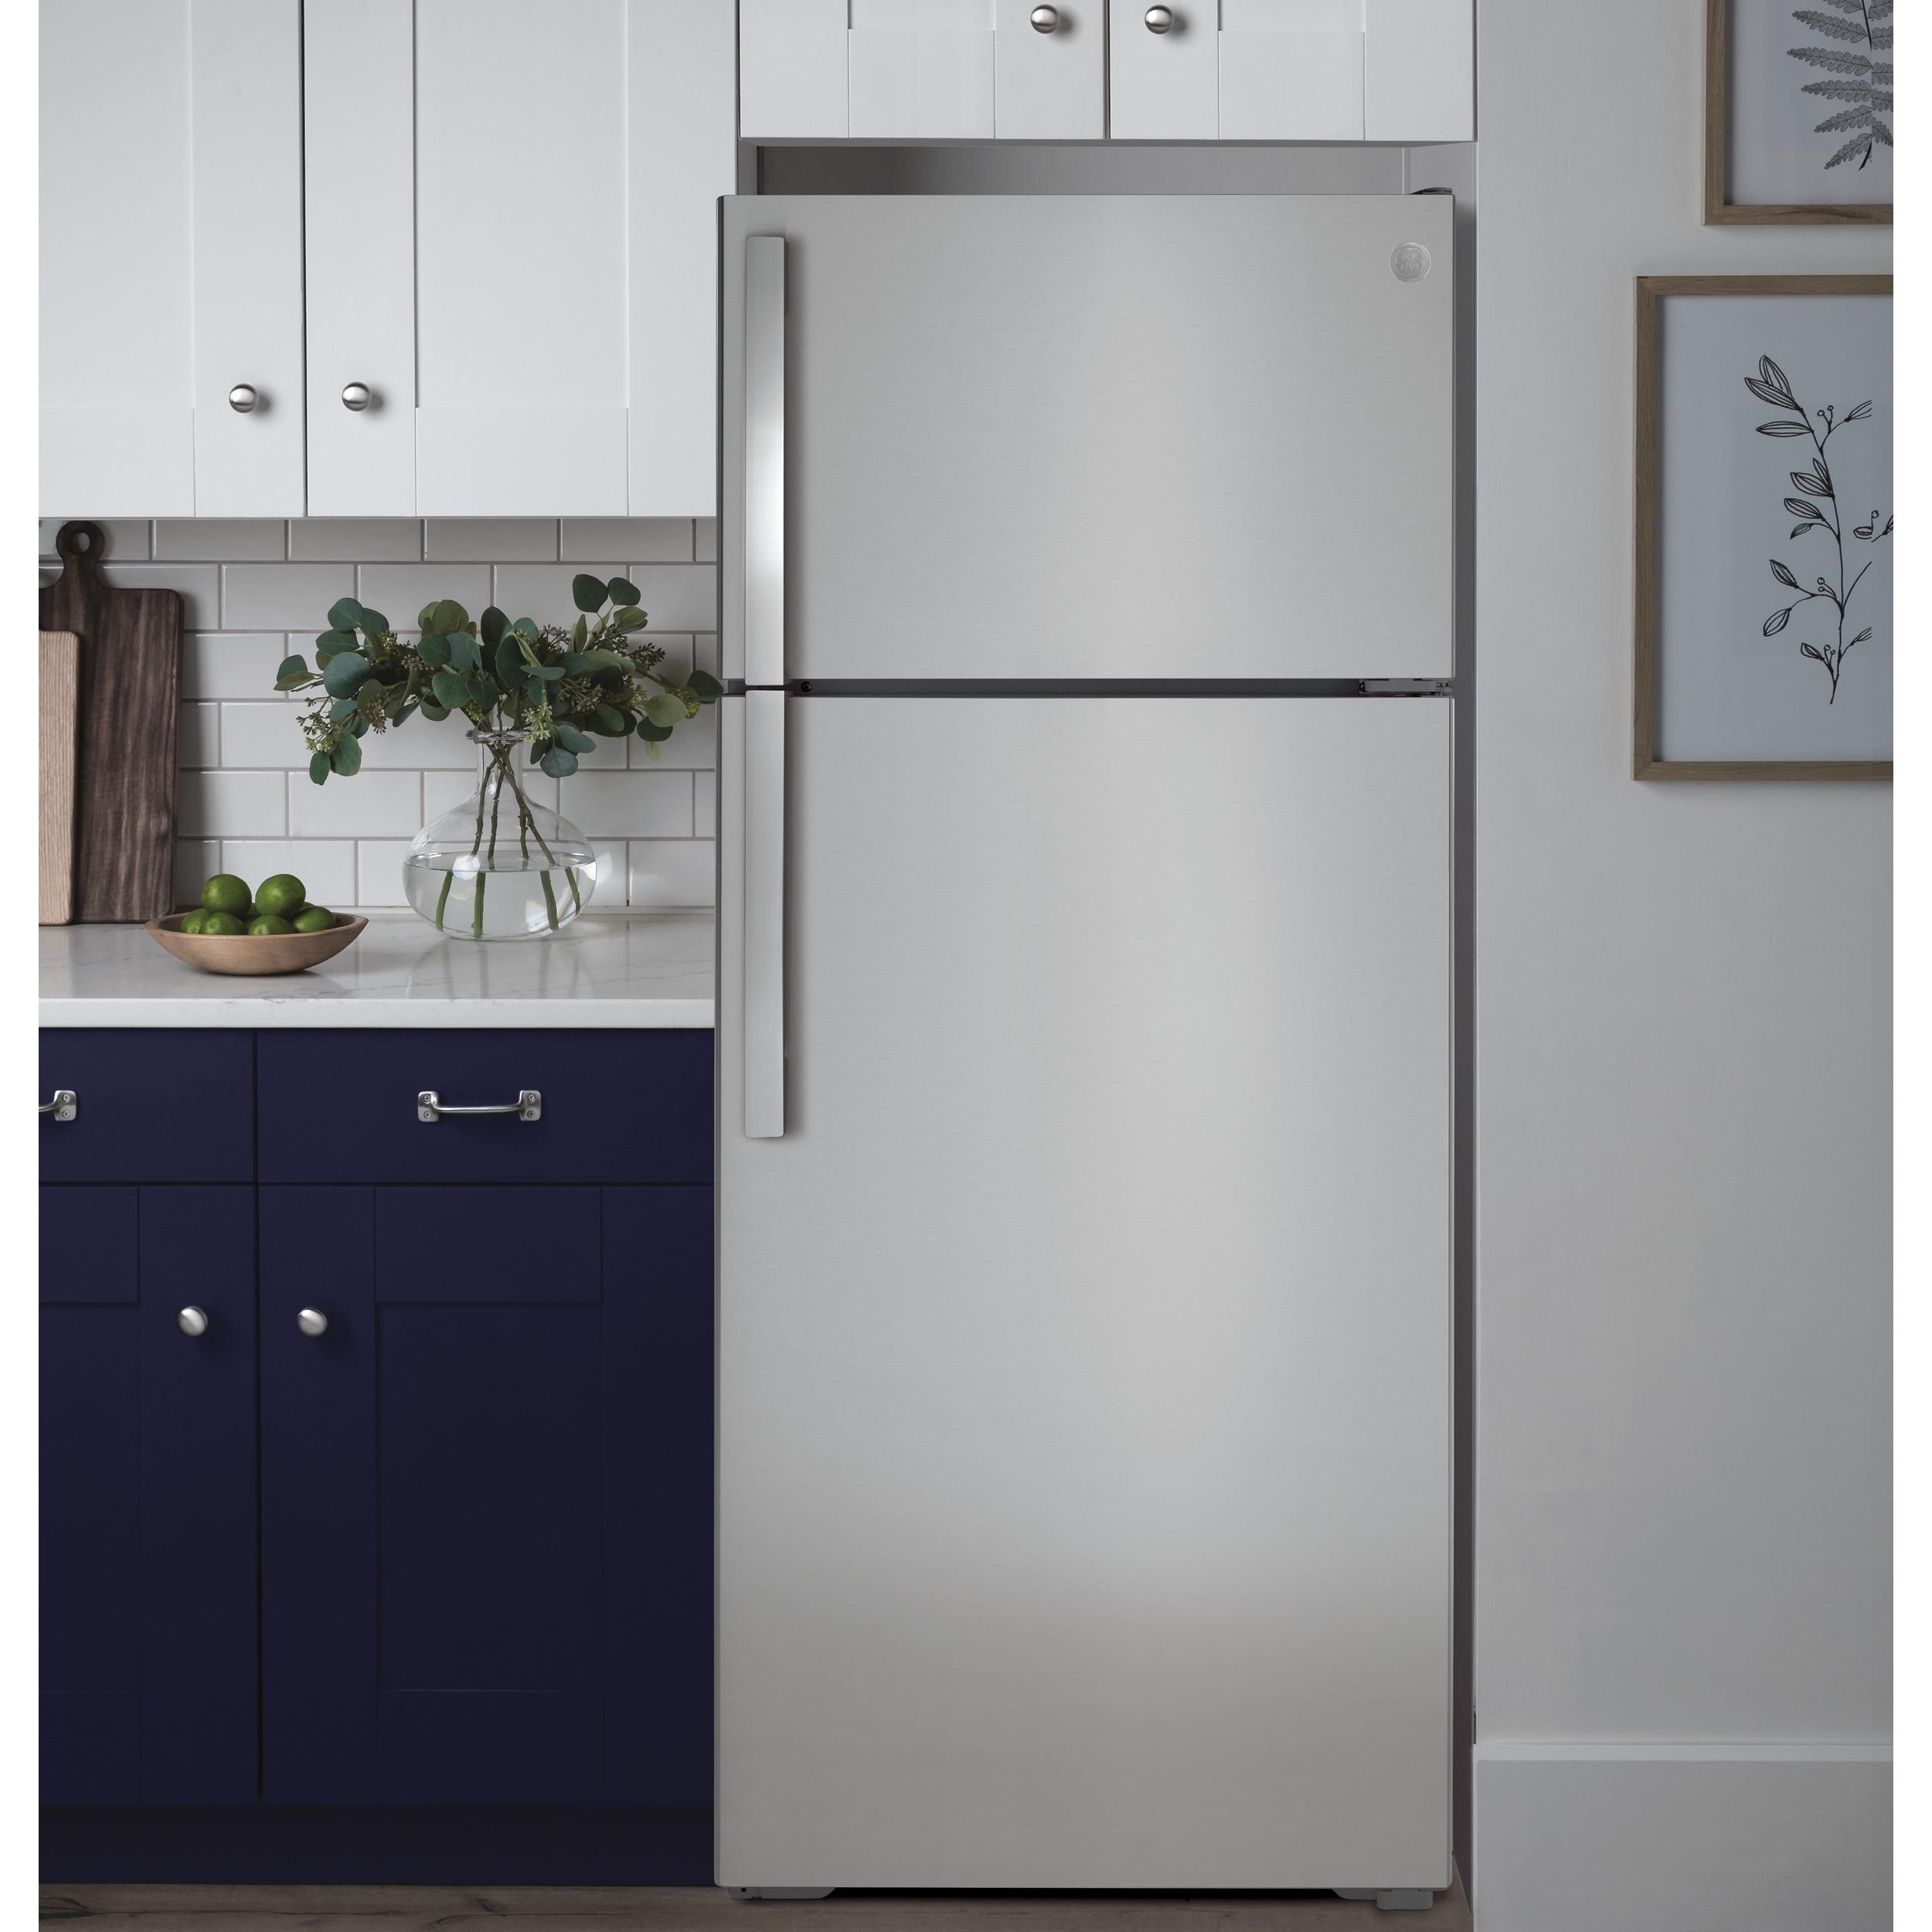 GE 28-inch, 17.5 cu.ft. Freestanding Top Freezer Refrigerator with LED Lighting GTS18GSNRSS